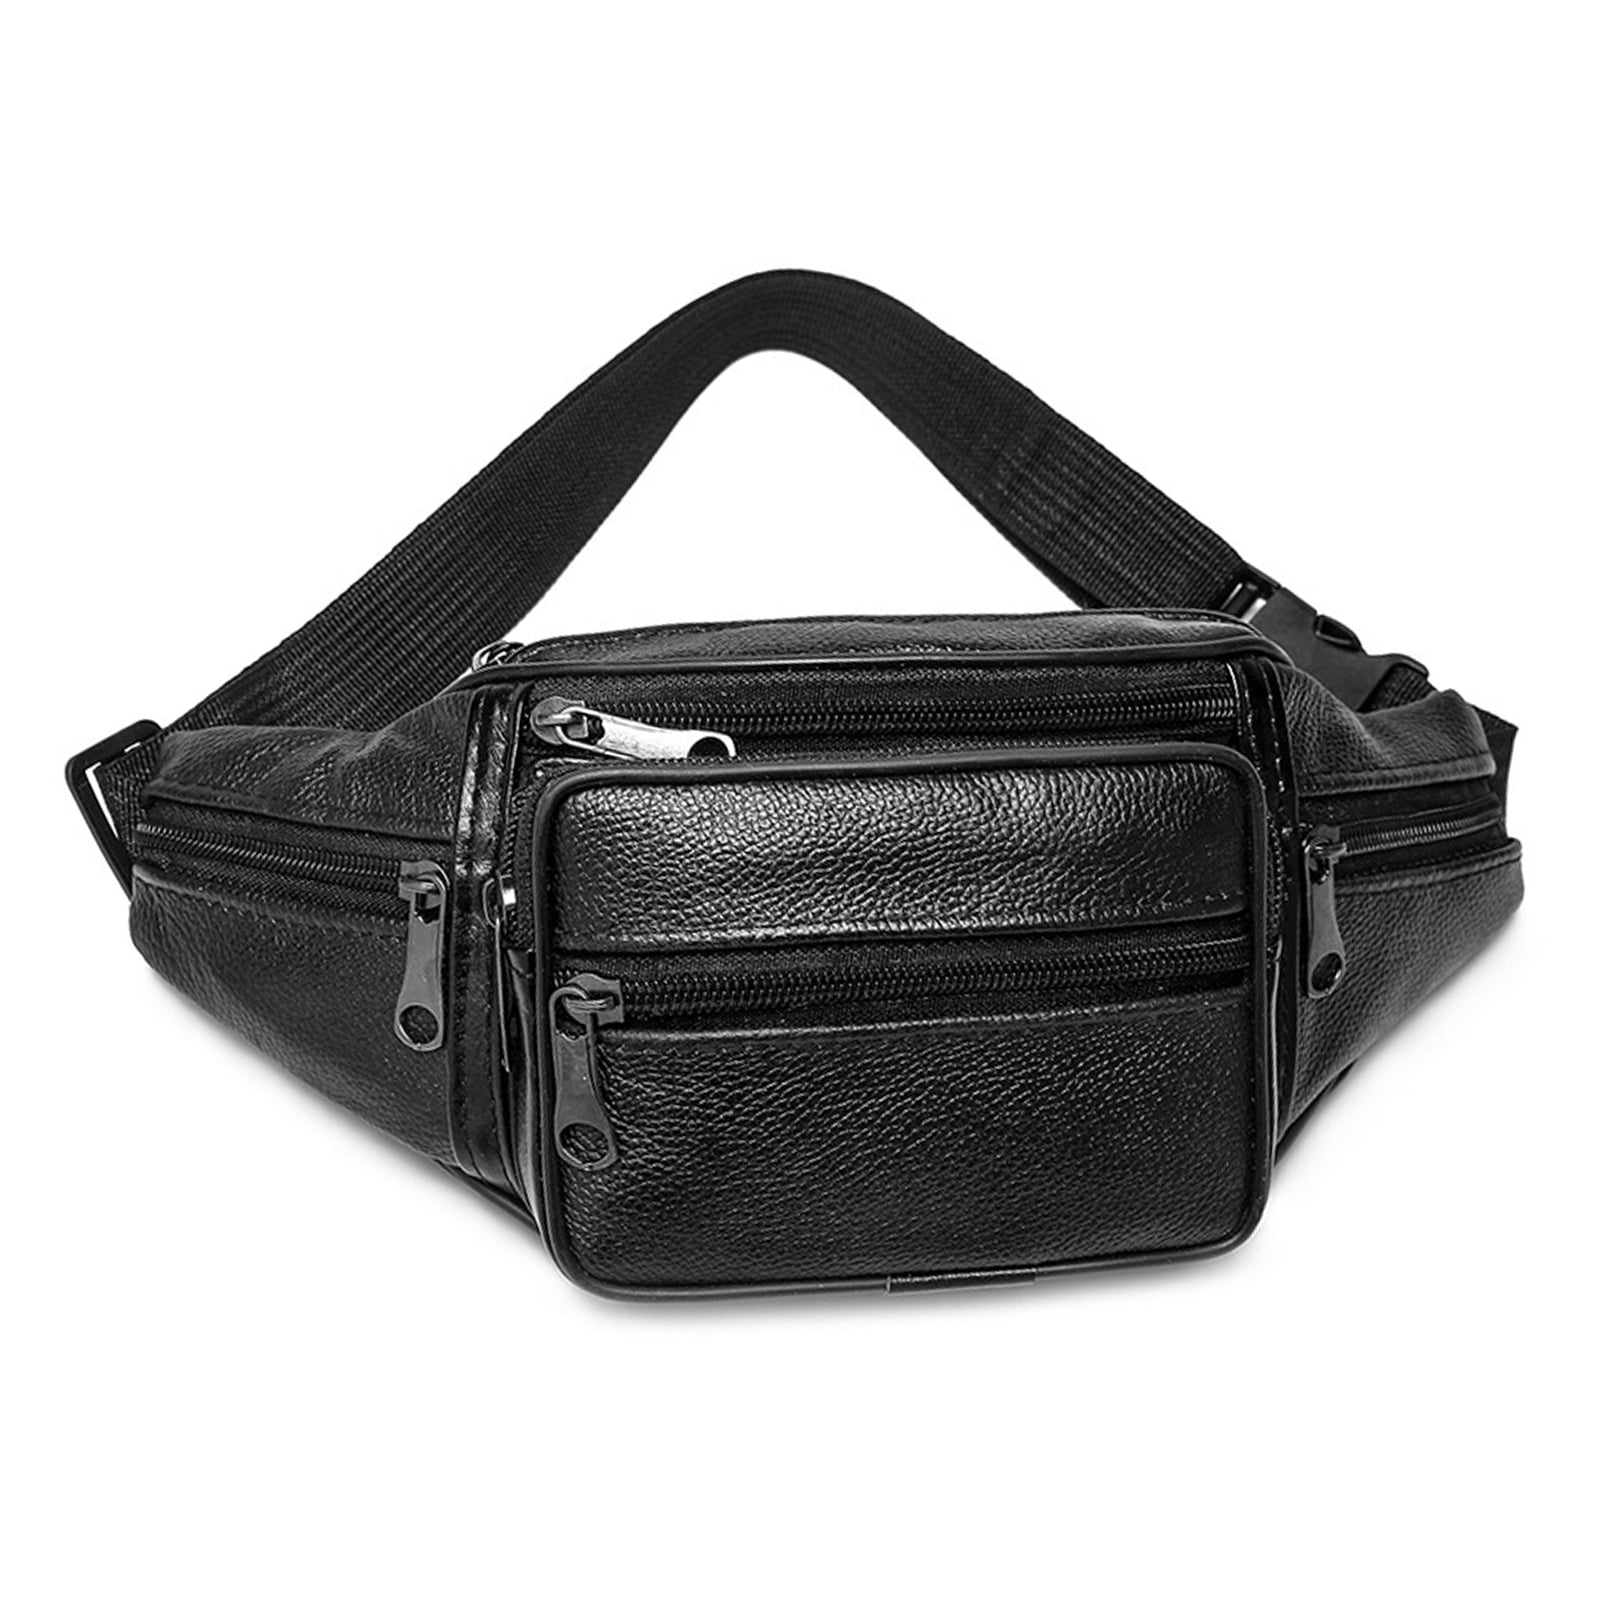 Leather Fanny Pack, TSV Waterproof Cell Phone Waist Bag with 7